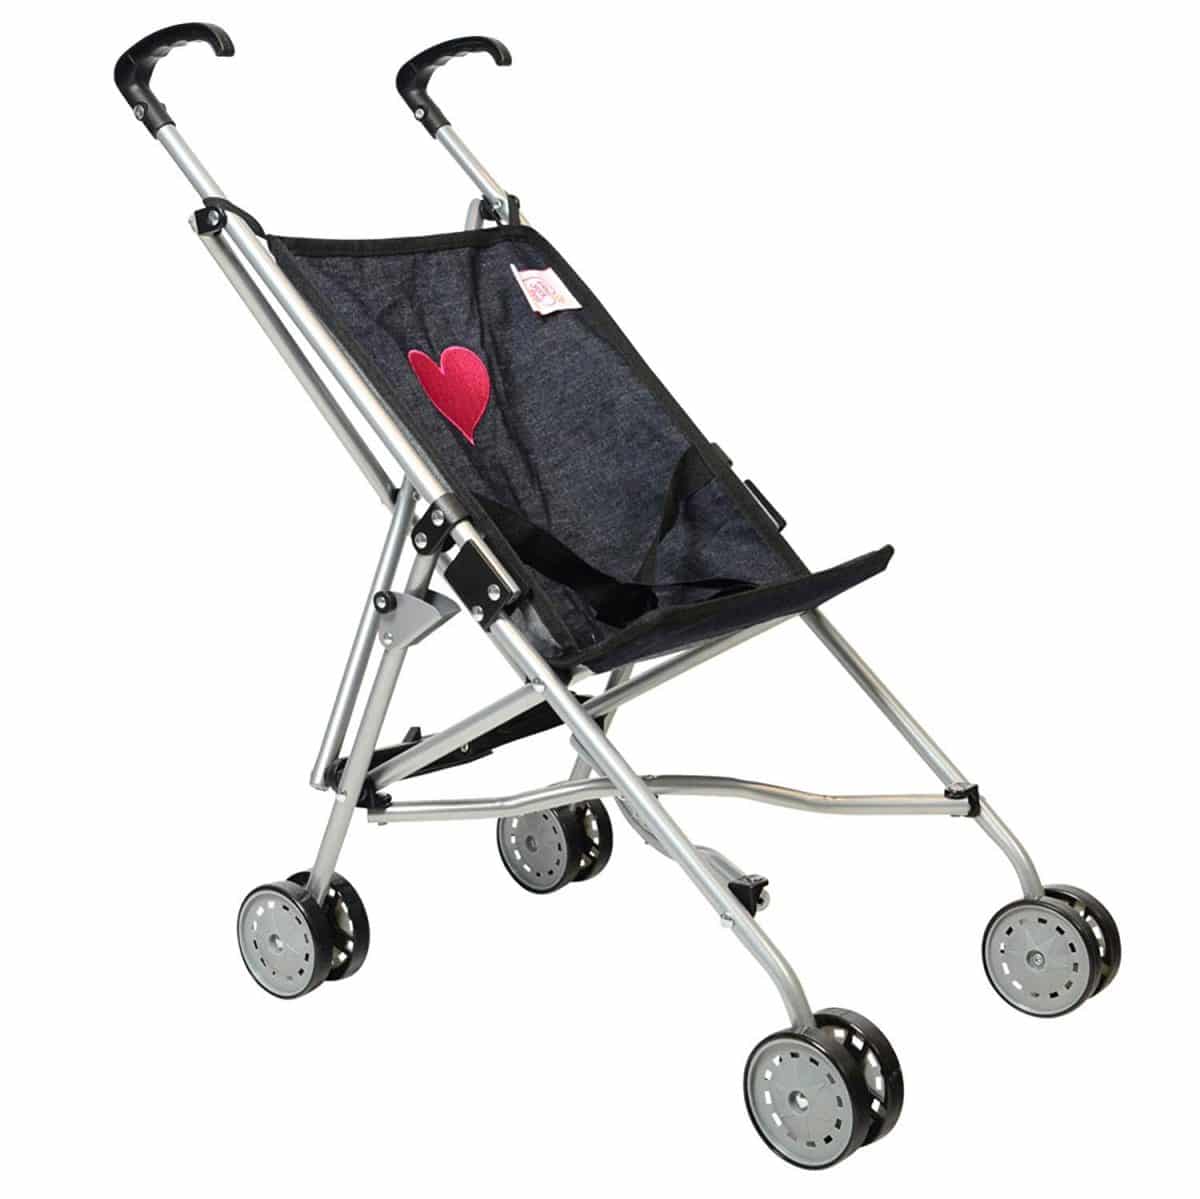 best doll stroller for 5 year old